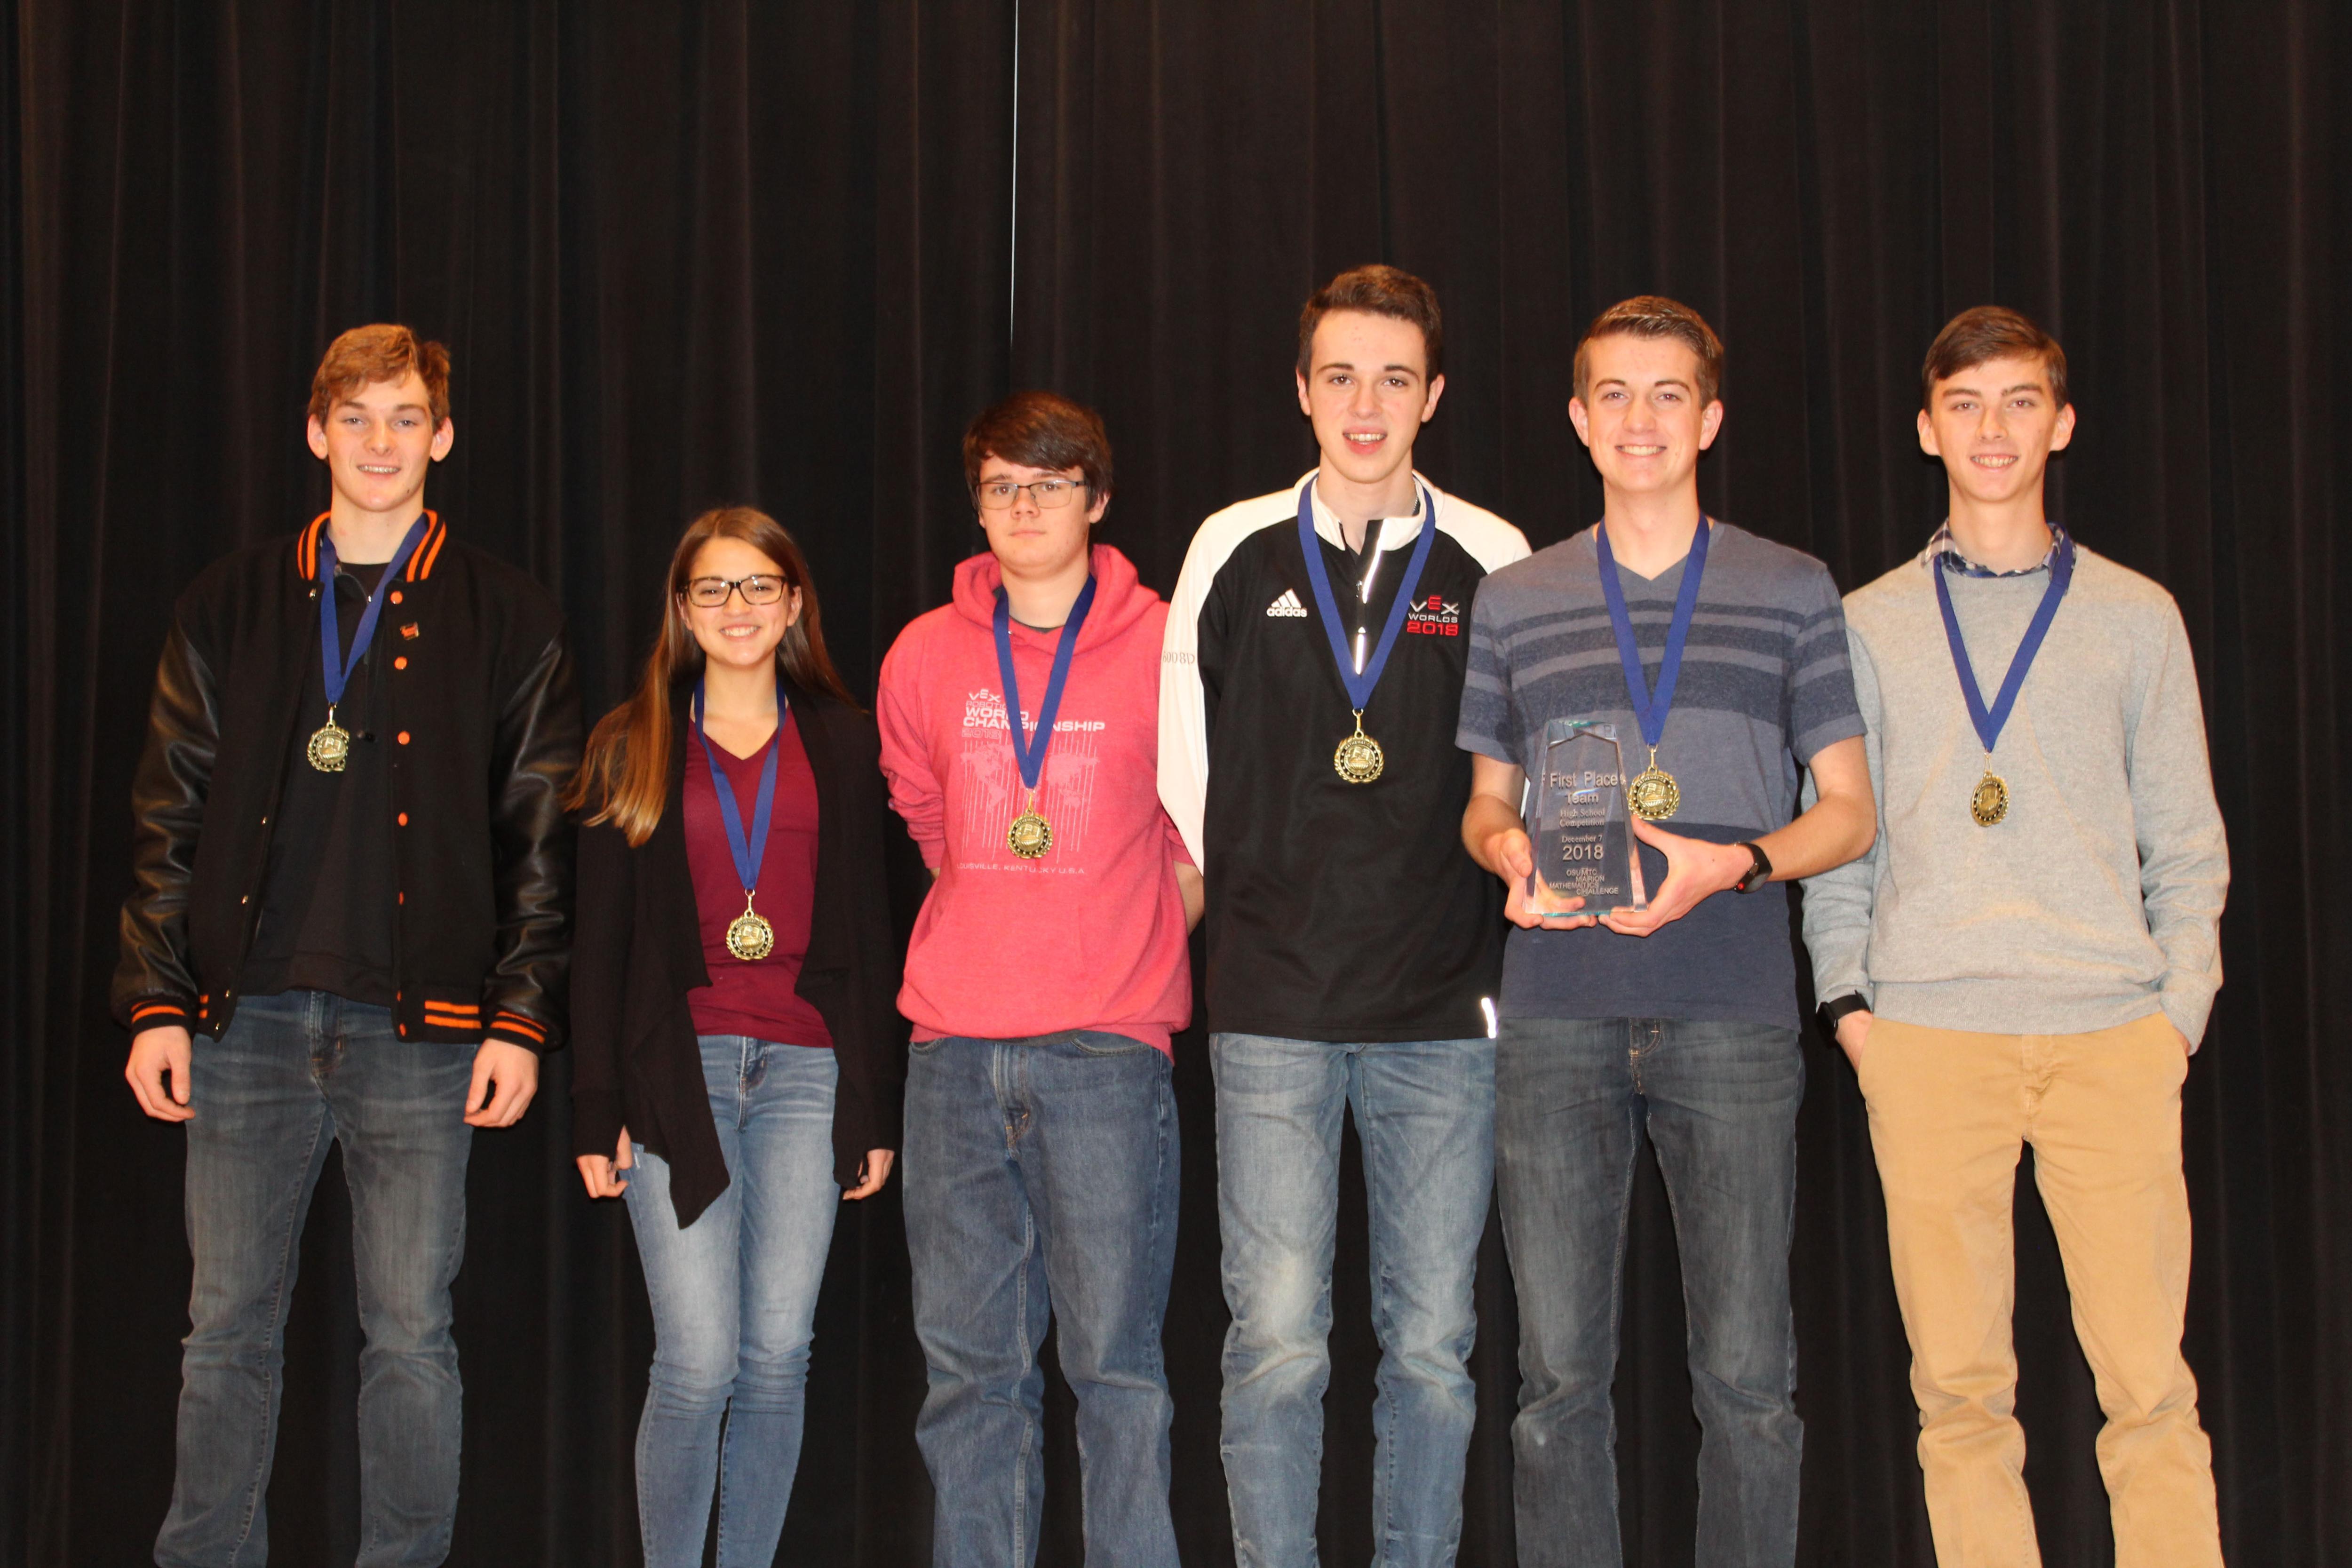 The winning team, six students from North Union High School, pictured with their medals and trophy